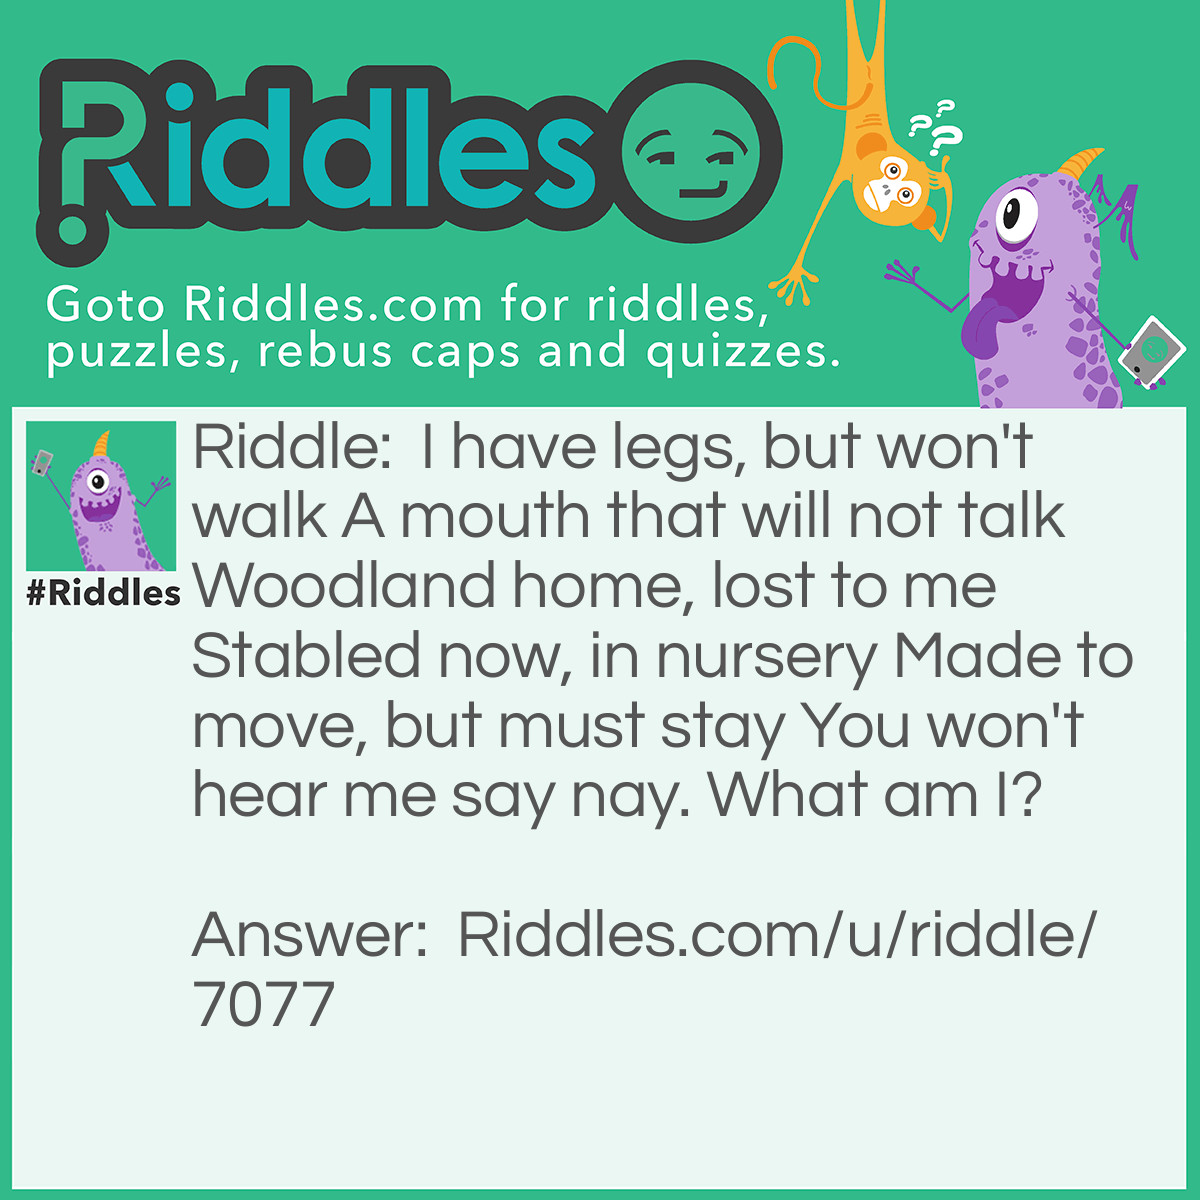 Riddle: I have legs, but won't walk
A mouth that will not talk
Woodland home, lost to me
Stabled now, in nursery
Made to move, but must stay
You won't hear me say nay.
What am I? Answer: A rocking horse.